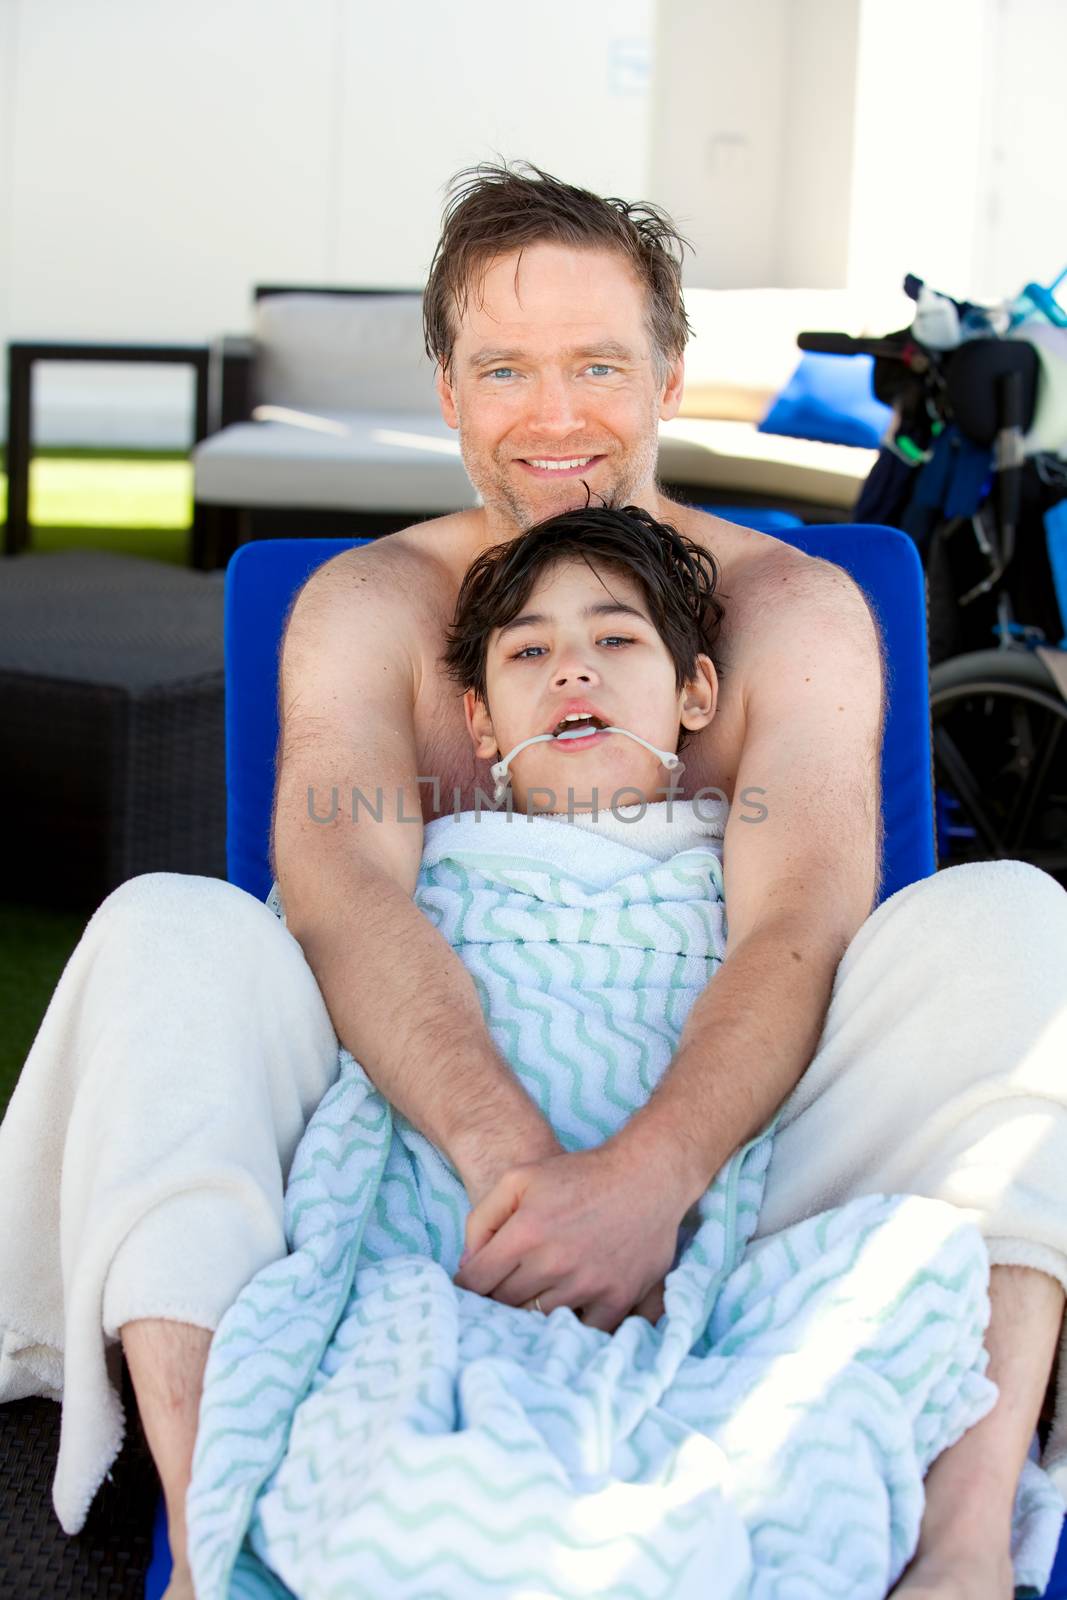 Caucasian father holding disabled son on blue poolside lounger, drying off after swimming. Child has cerebral palsy. 